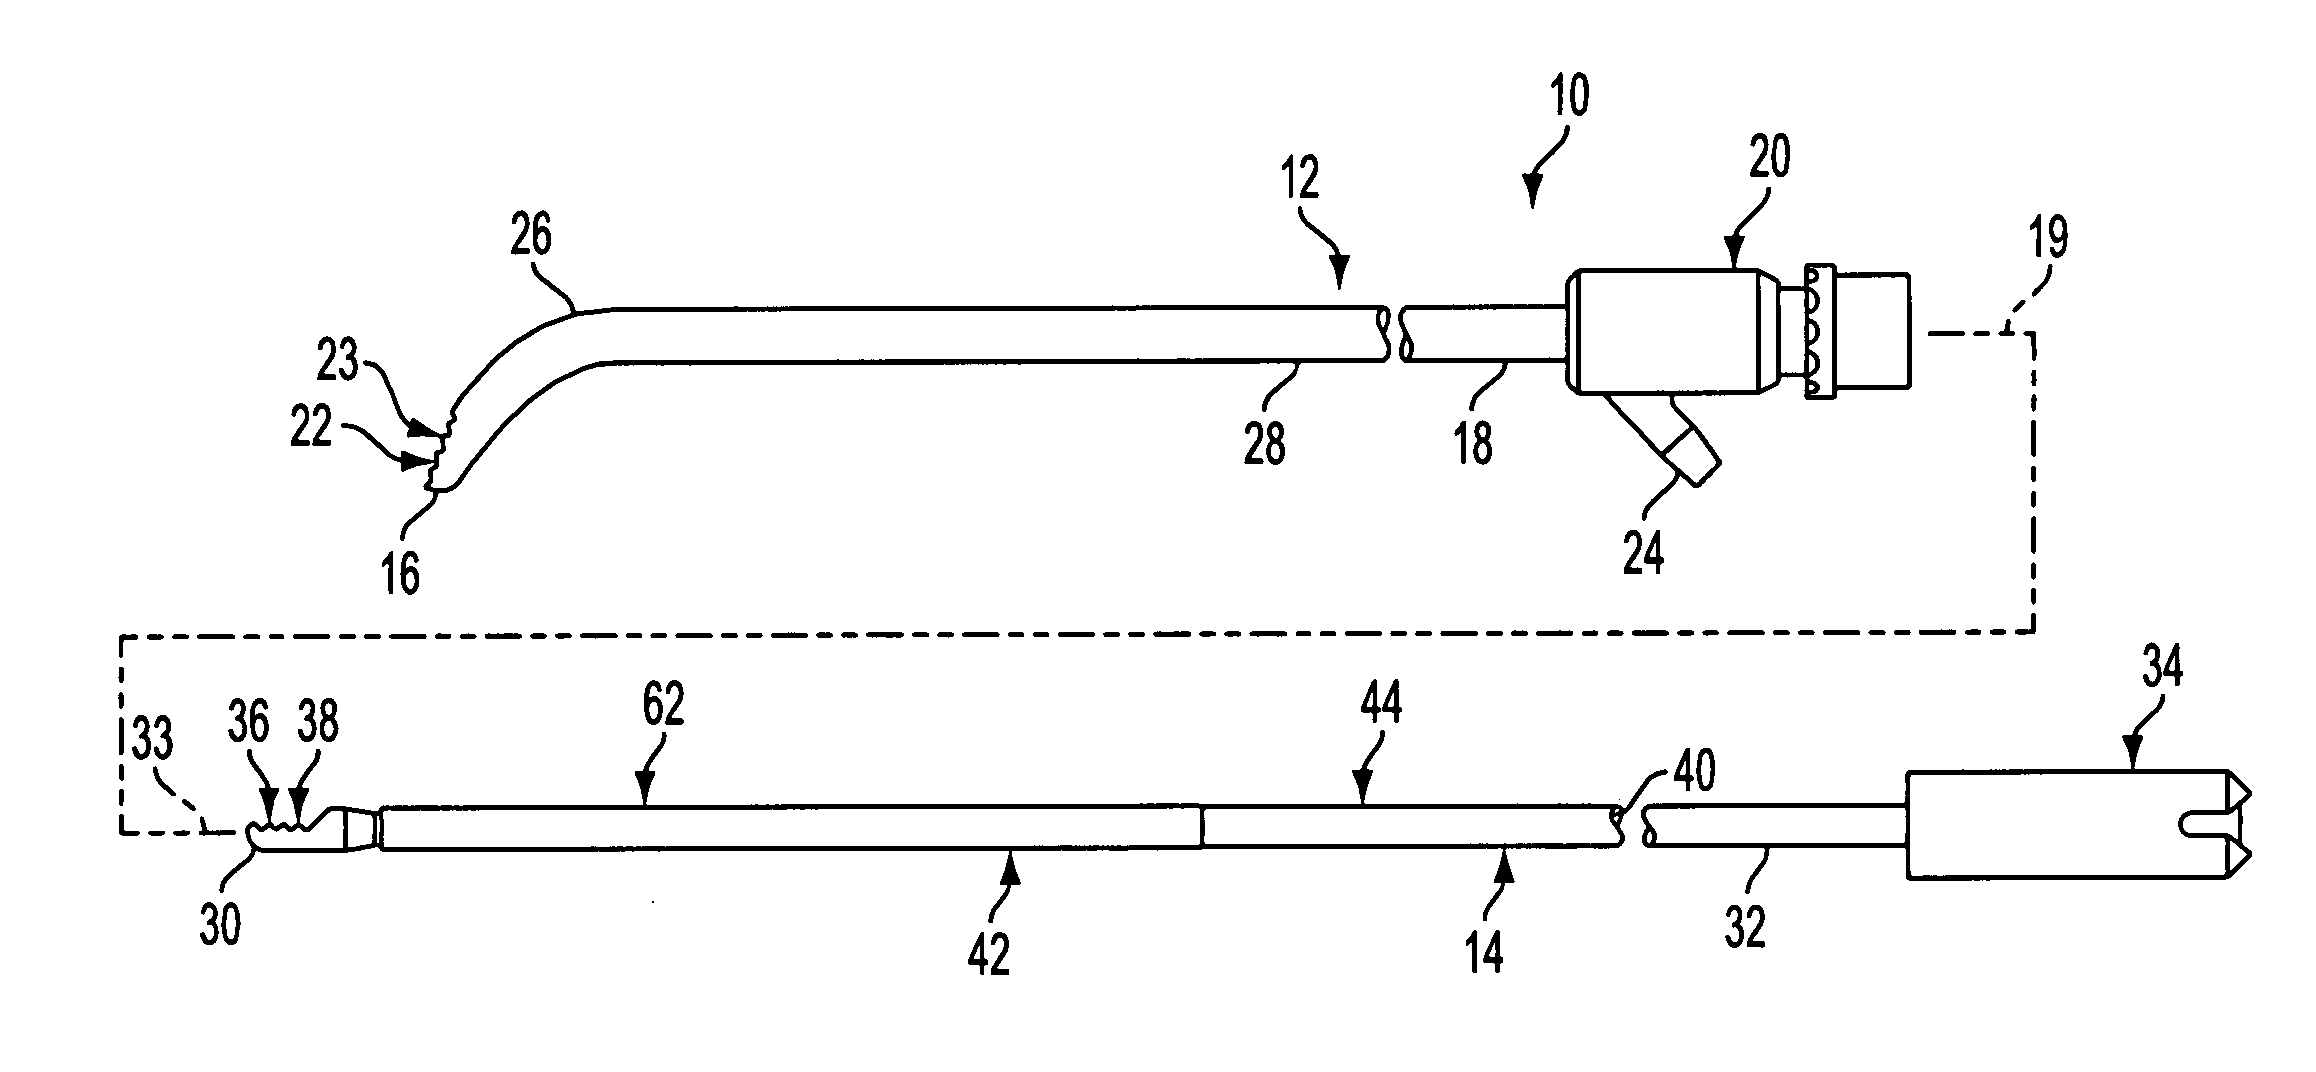 Angled tissue cutting instruments and method of fabricating angled tissue cutting instruments having flexible inner tubular members of tube and sleeve construction